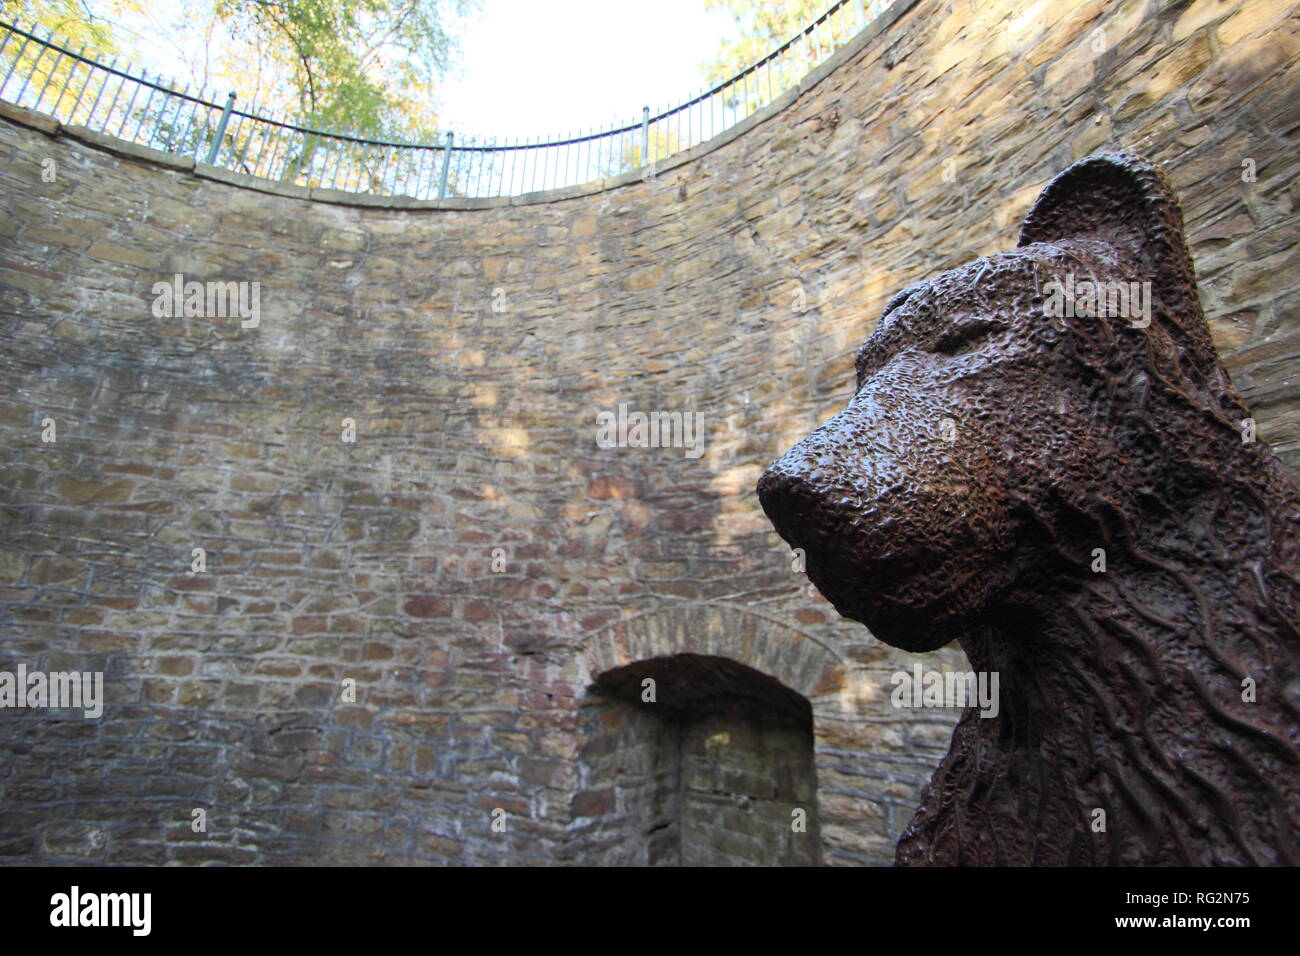 Bear pit featuring bear statue at Sheffield Botanical Gardens, Yorkshire, England, UK. Reputed to be finest surviving example of a bear pit in the UK. Stock Photo